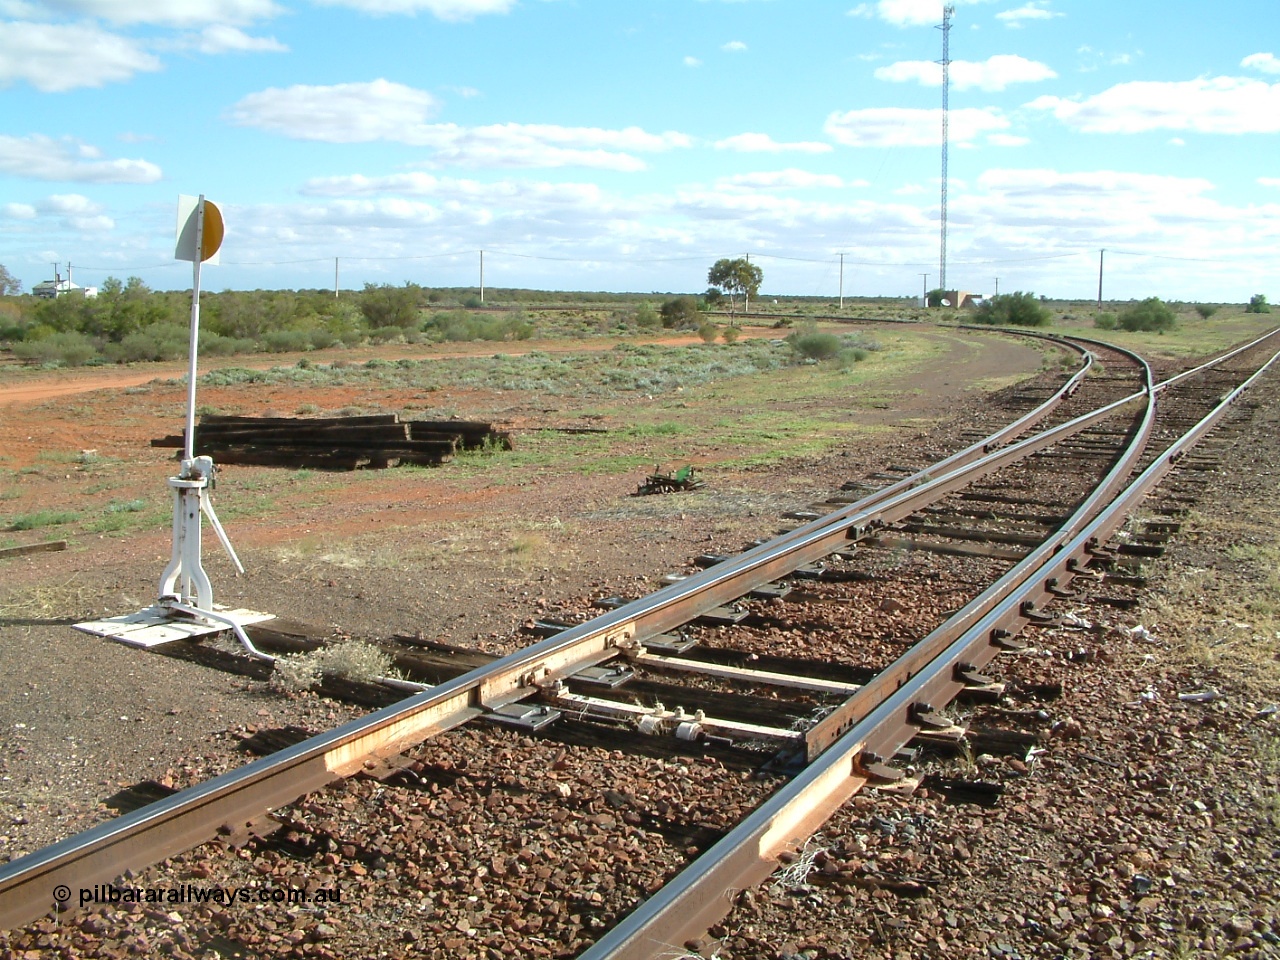 030415 154518
Tarcoola, at the 504.5 km, looking west along the eastern leg of the triangle, power station on the left, loop line running to the right. Tarcoola is the junction for the TAR and CAR railways situated 504 km from the 0 km datum at Coonamia. [url=https://goo.gl/maps/NmBNmrosE7e6d5gx8]GeoData location[/url]. 15th April 2003.
